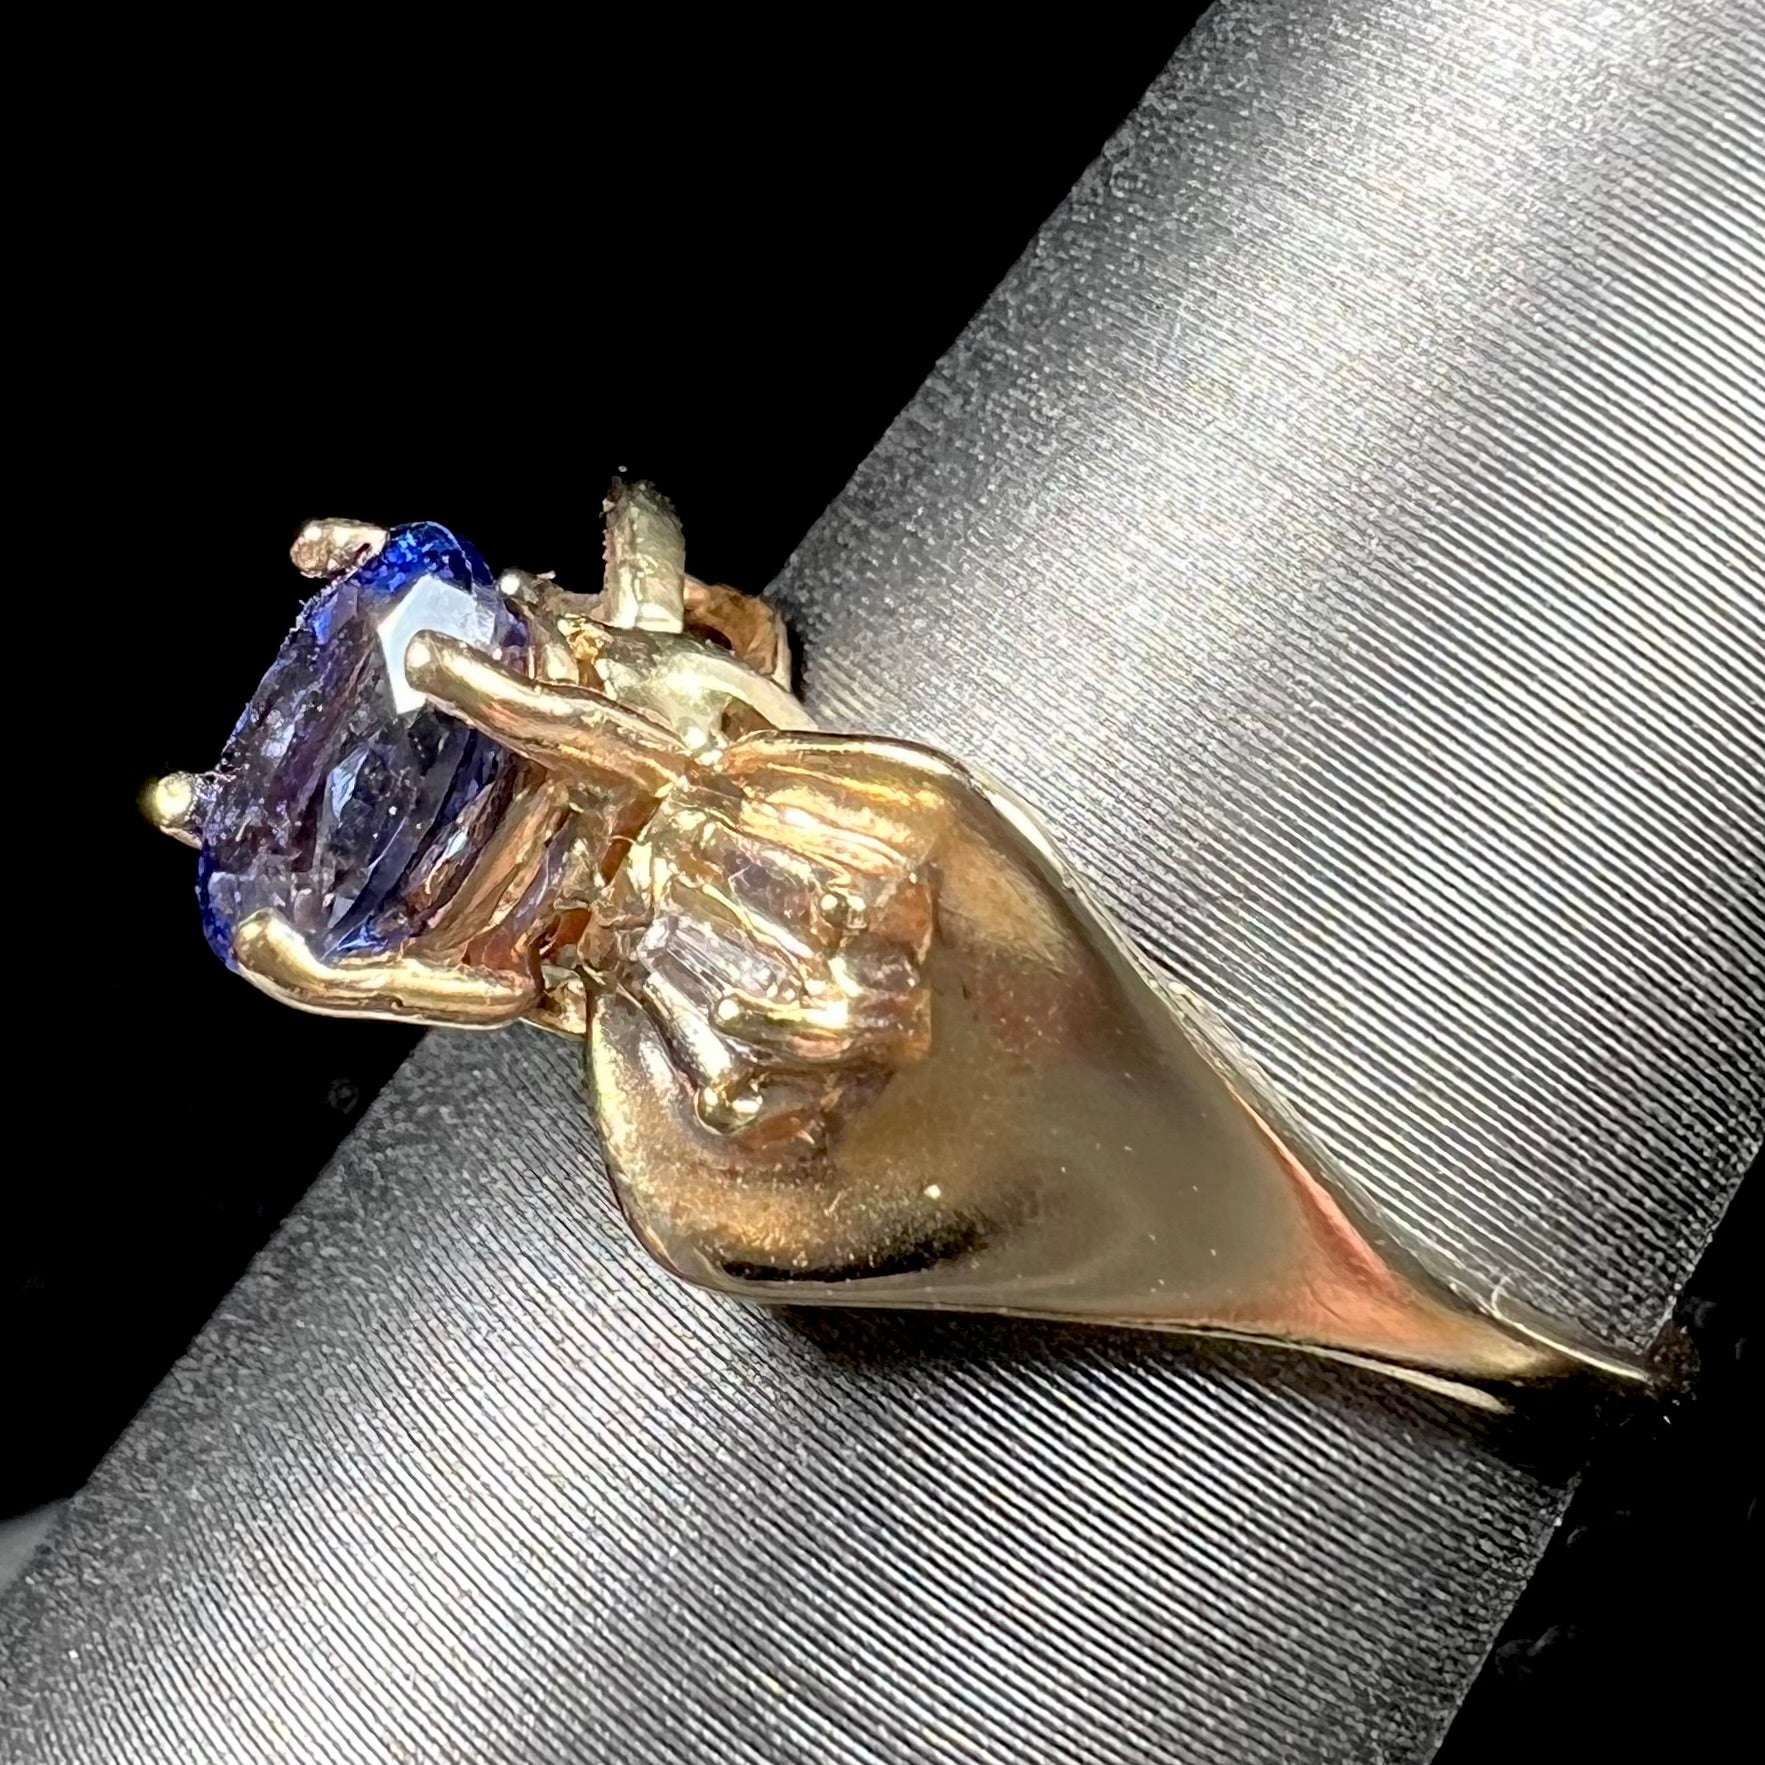 A natural blue sapphire and diamond baguette ring cast in yellow gold.